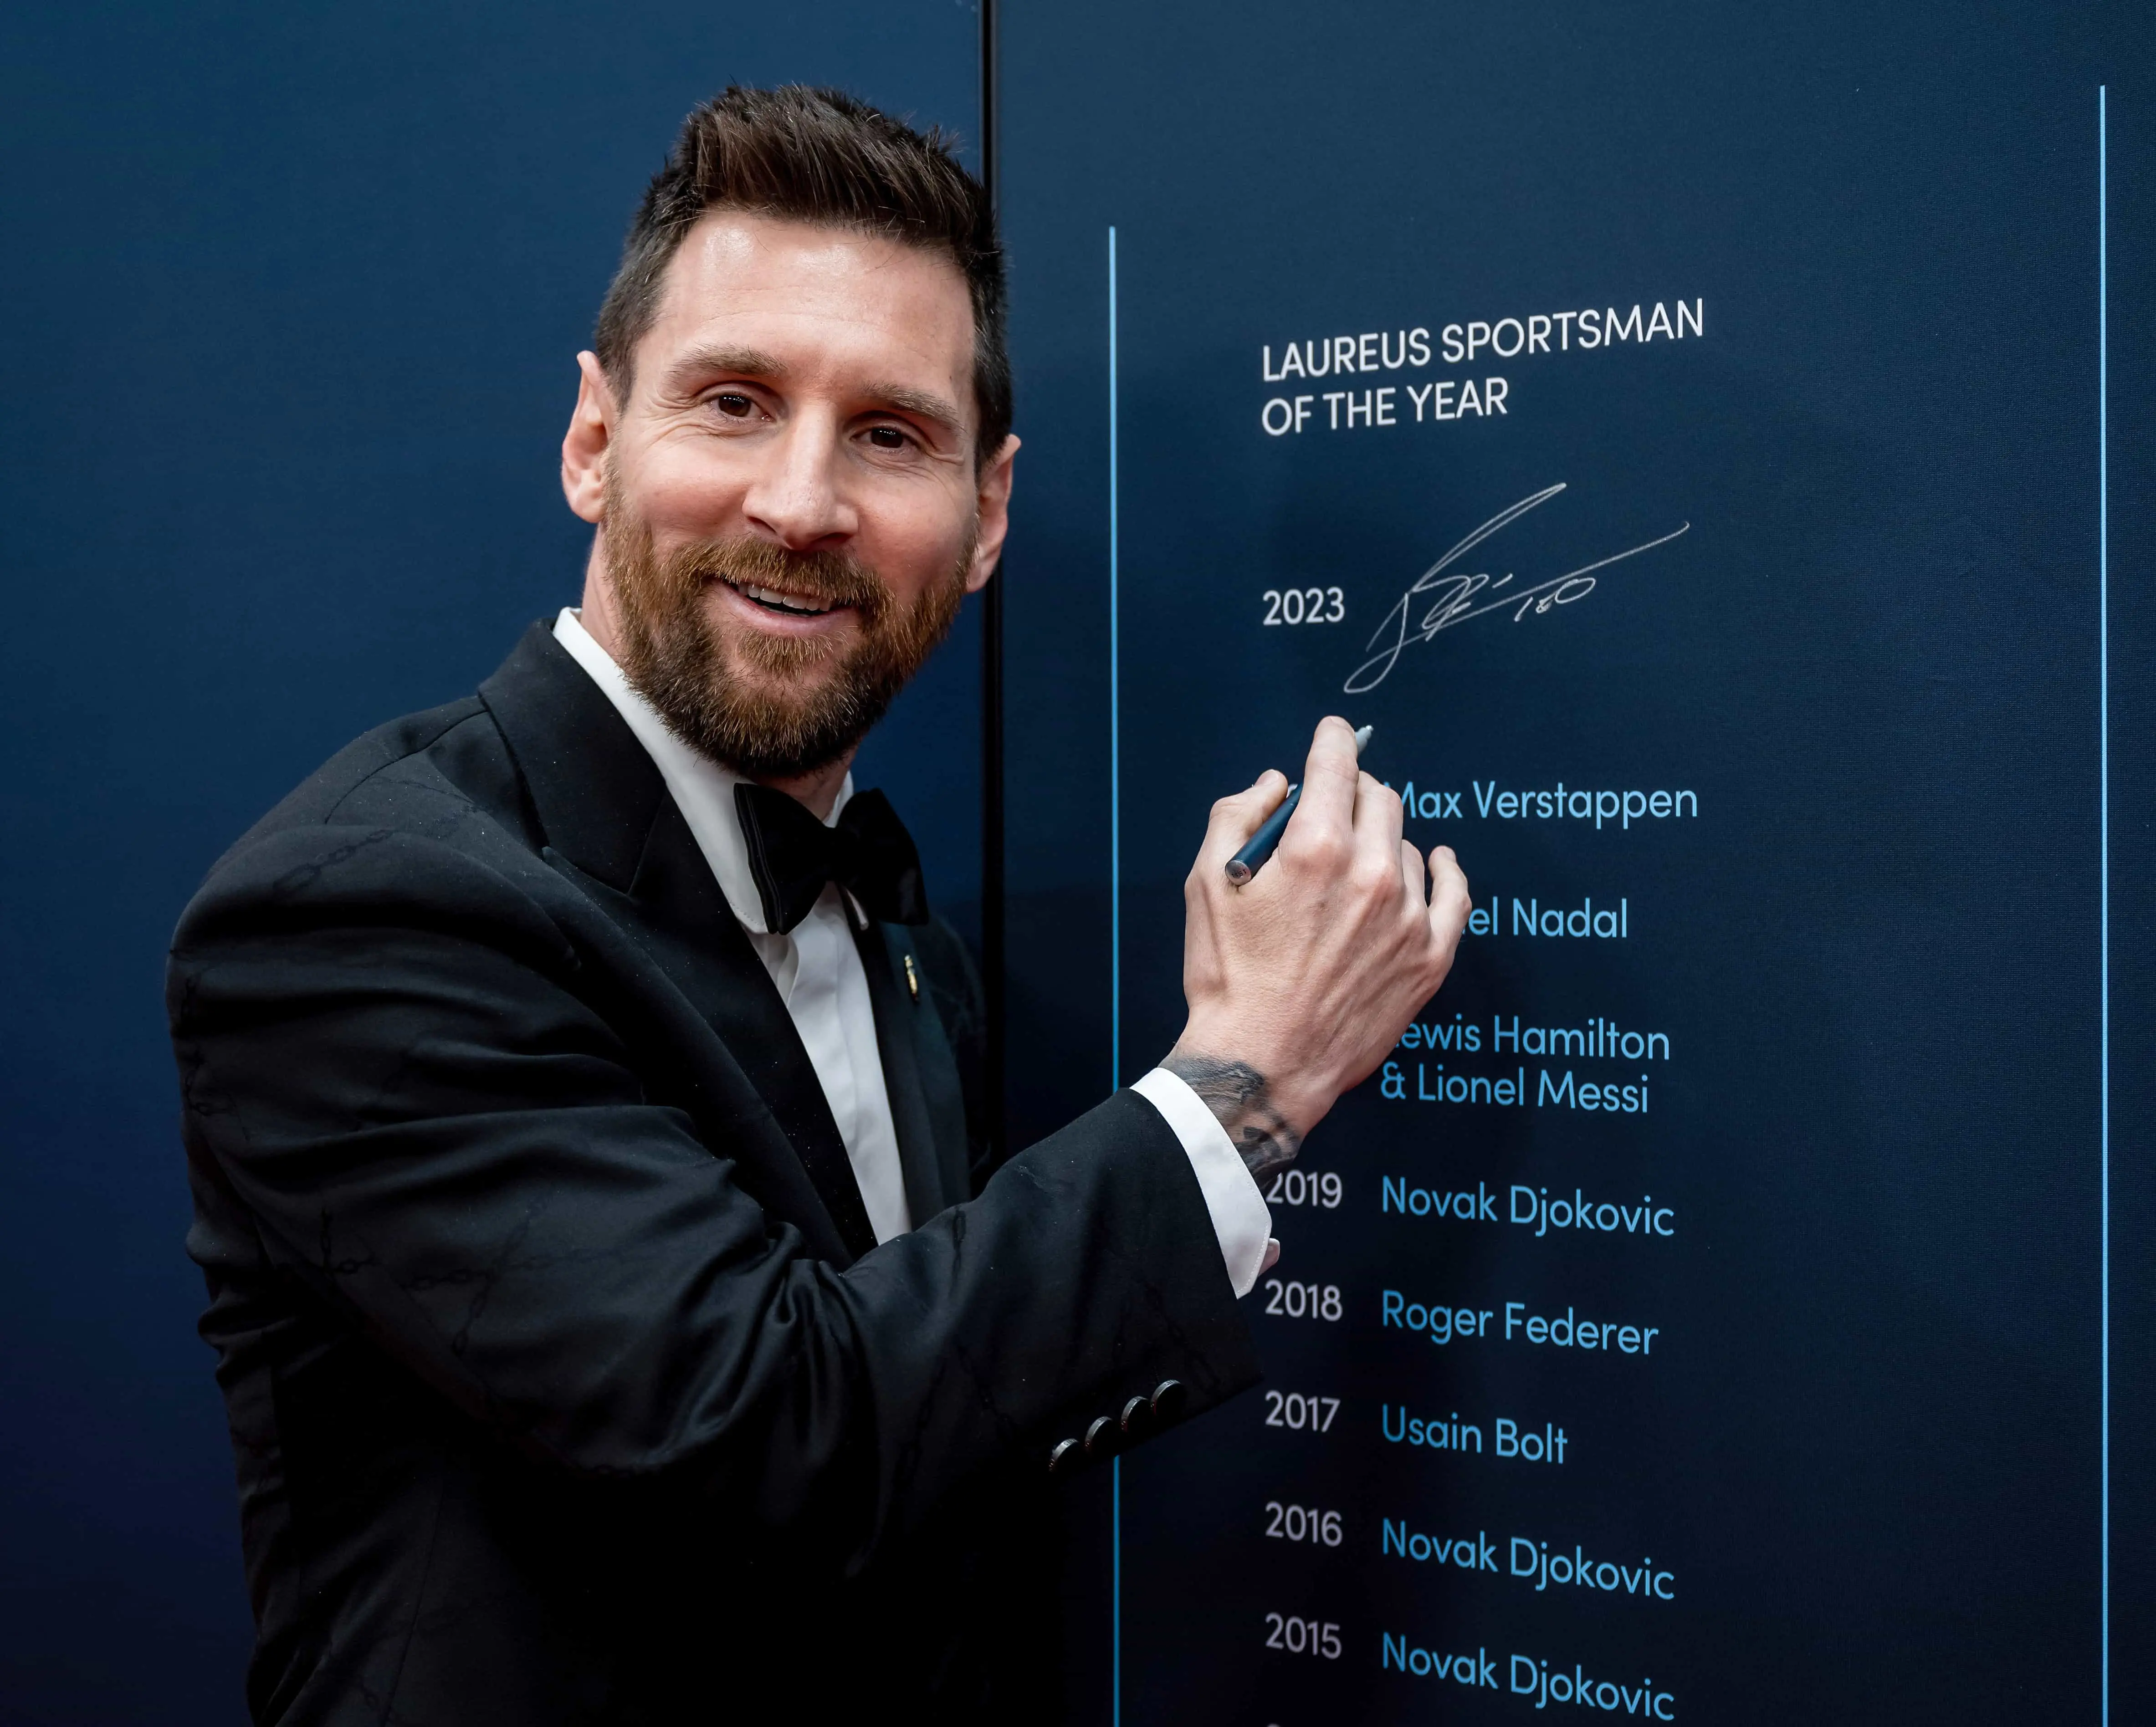 Lionel Messi wins the Laureus World Sportsman of the Year award